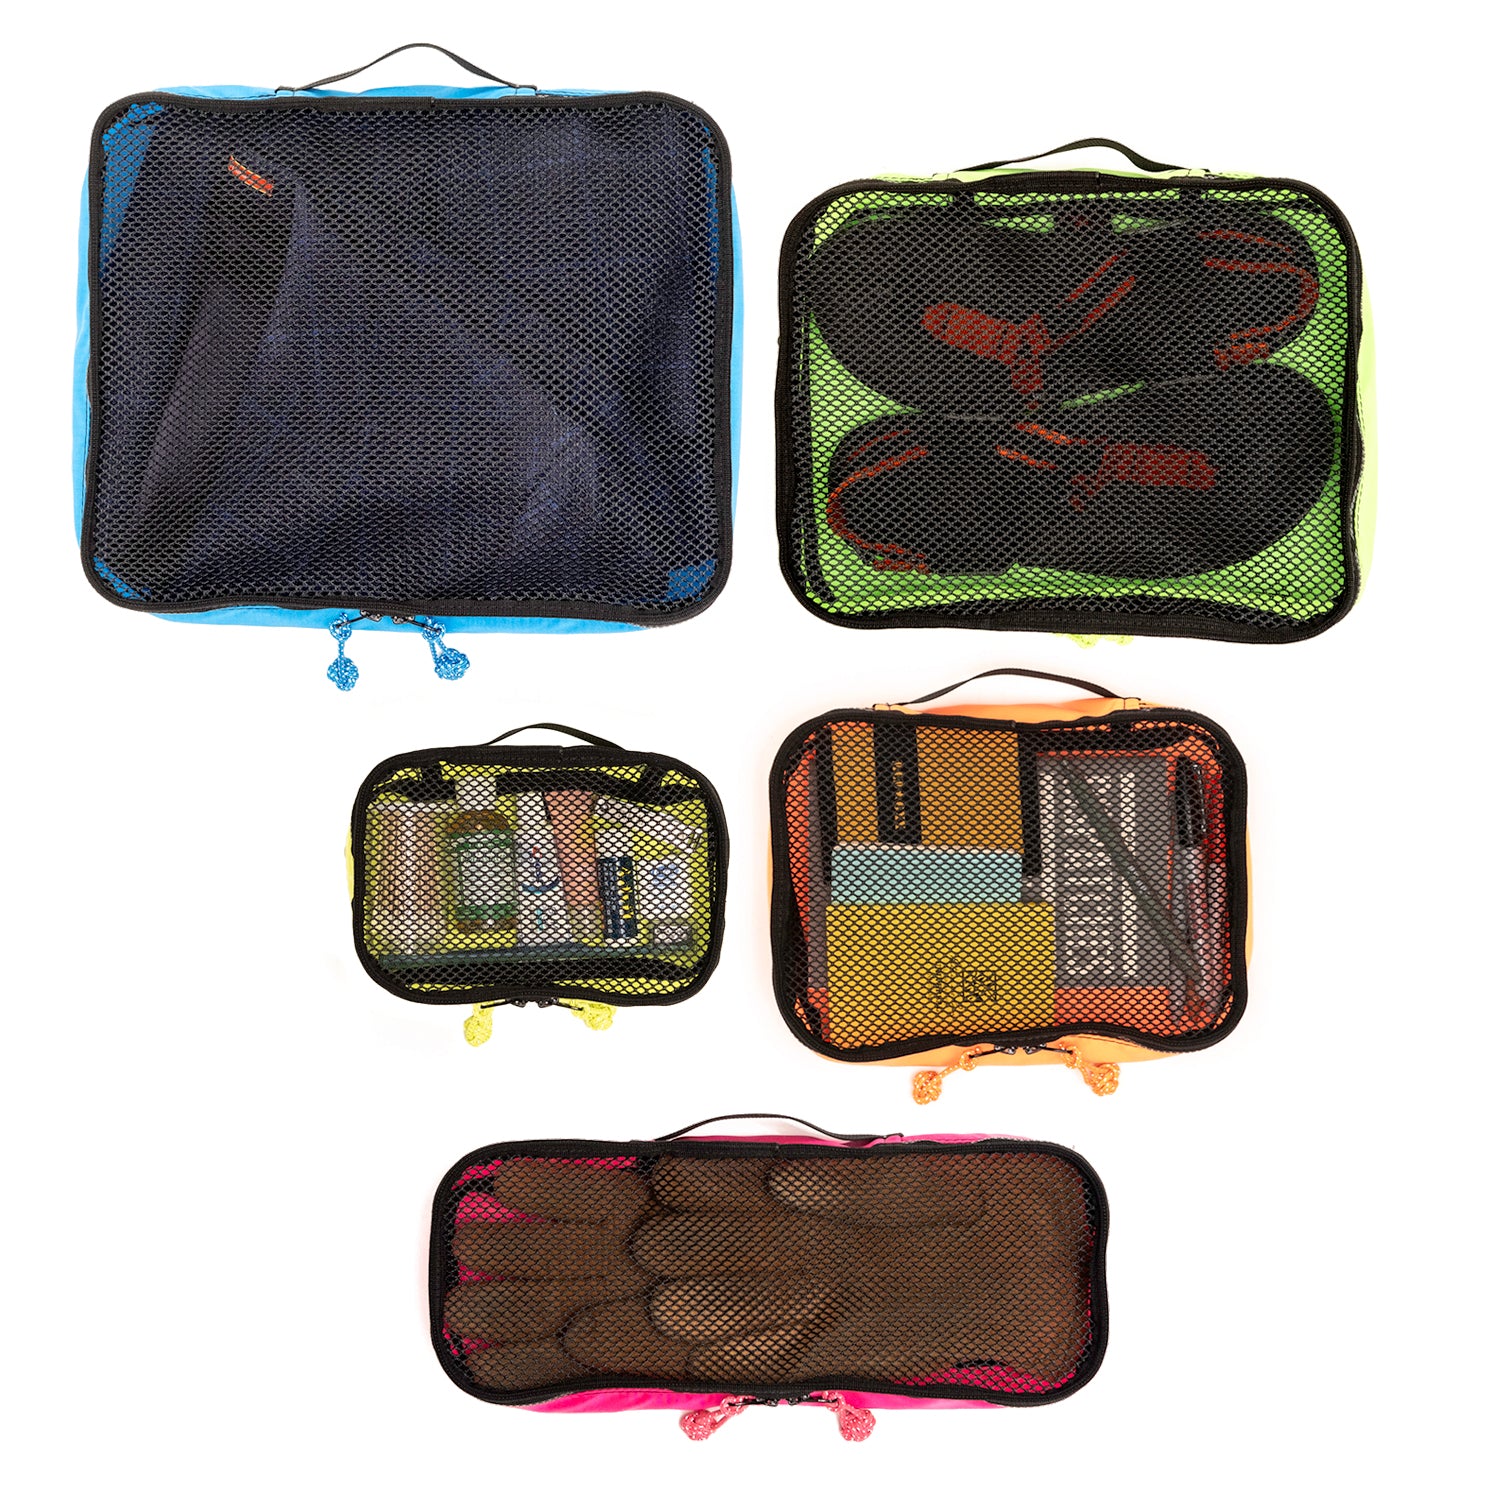 Overhead view of packing cubes with travel goods in each.  Kingfisher in blue has a pair of sweatpants, Bushbaby has a pair of sandals,Hedgehog is shown with toiletries, Armadillo is shown with notebook, pens and wallet. Meerkat is shown with leather work gloves. 